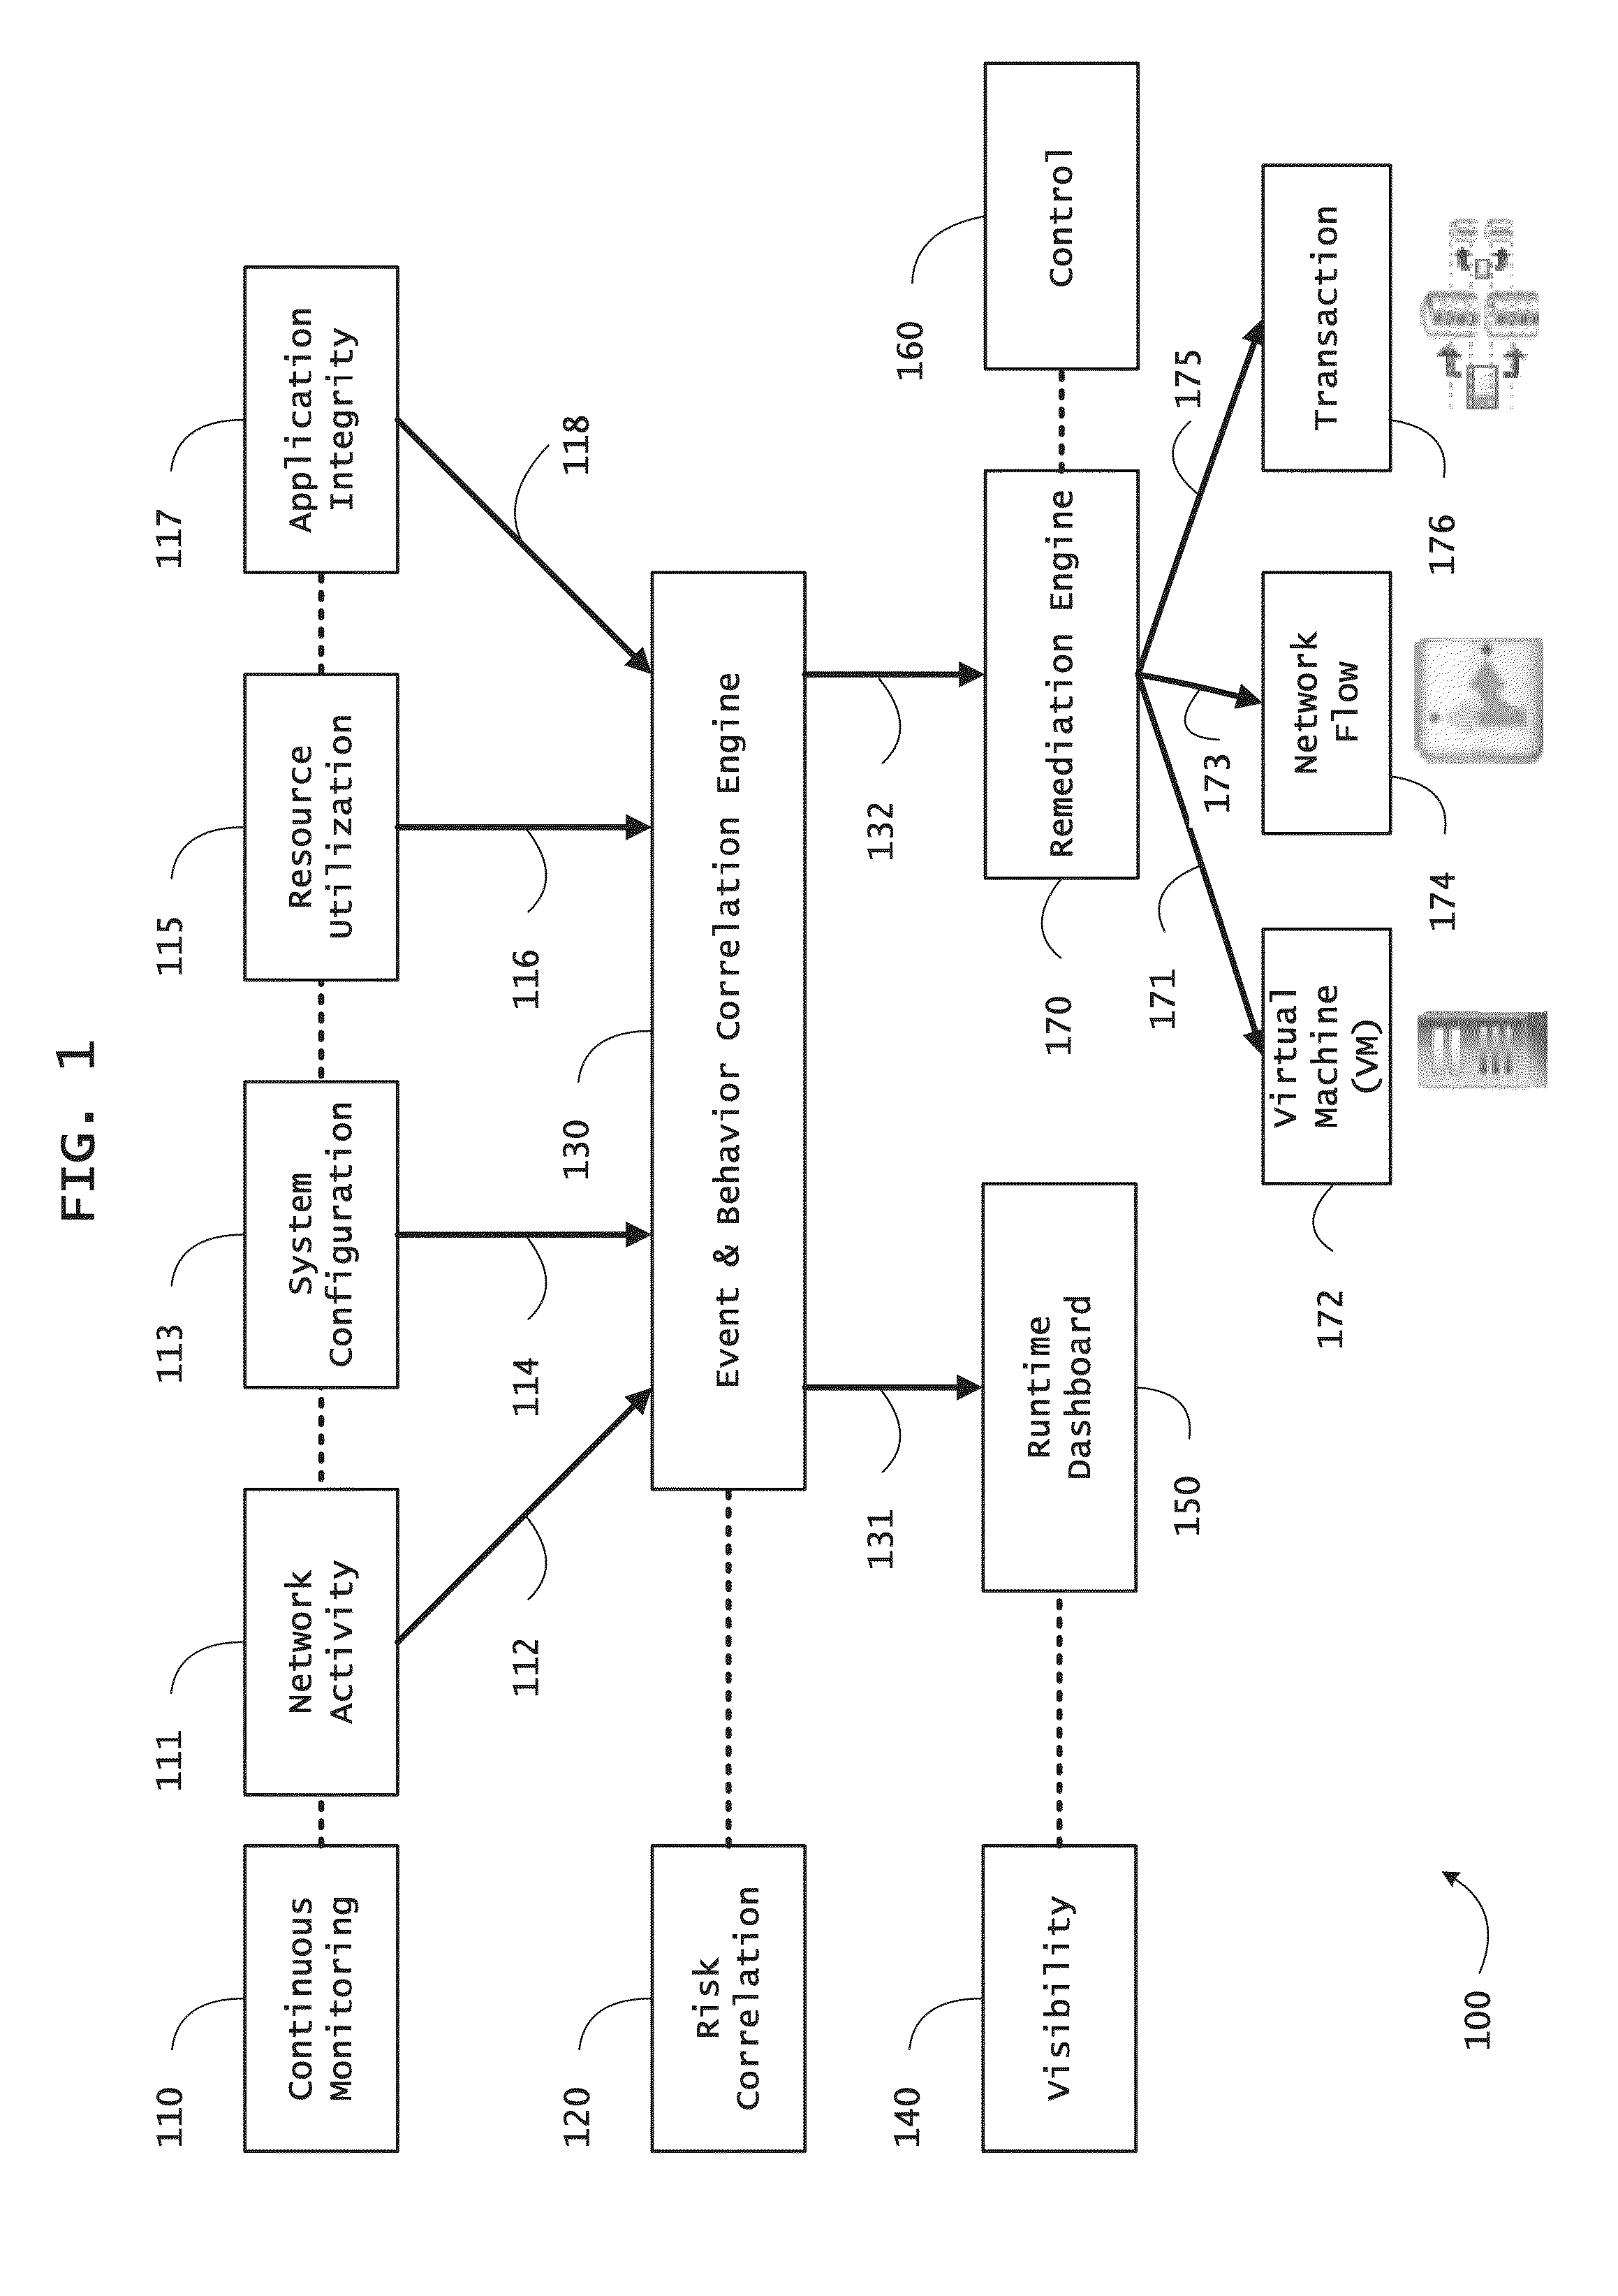 Systems and methods for providing mobile security based on dynamic attestation